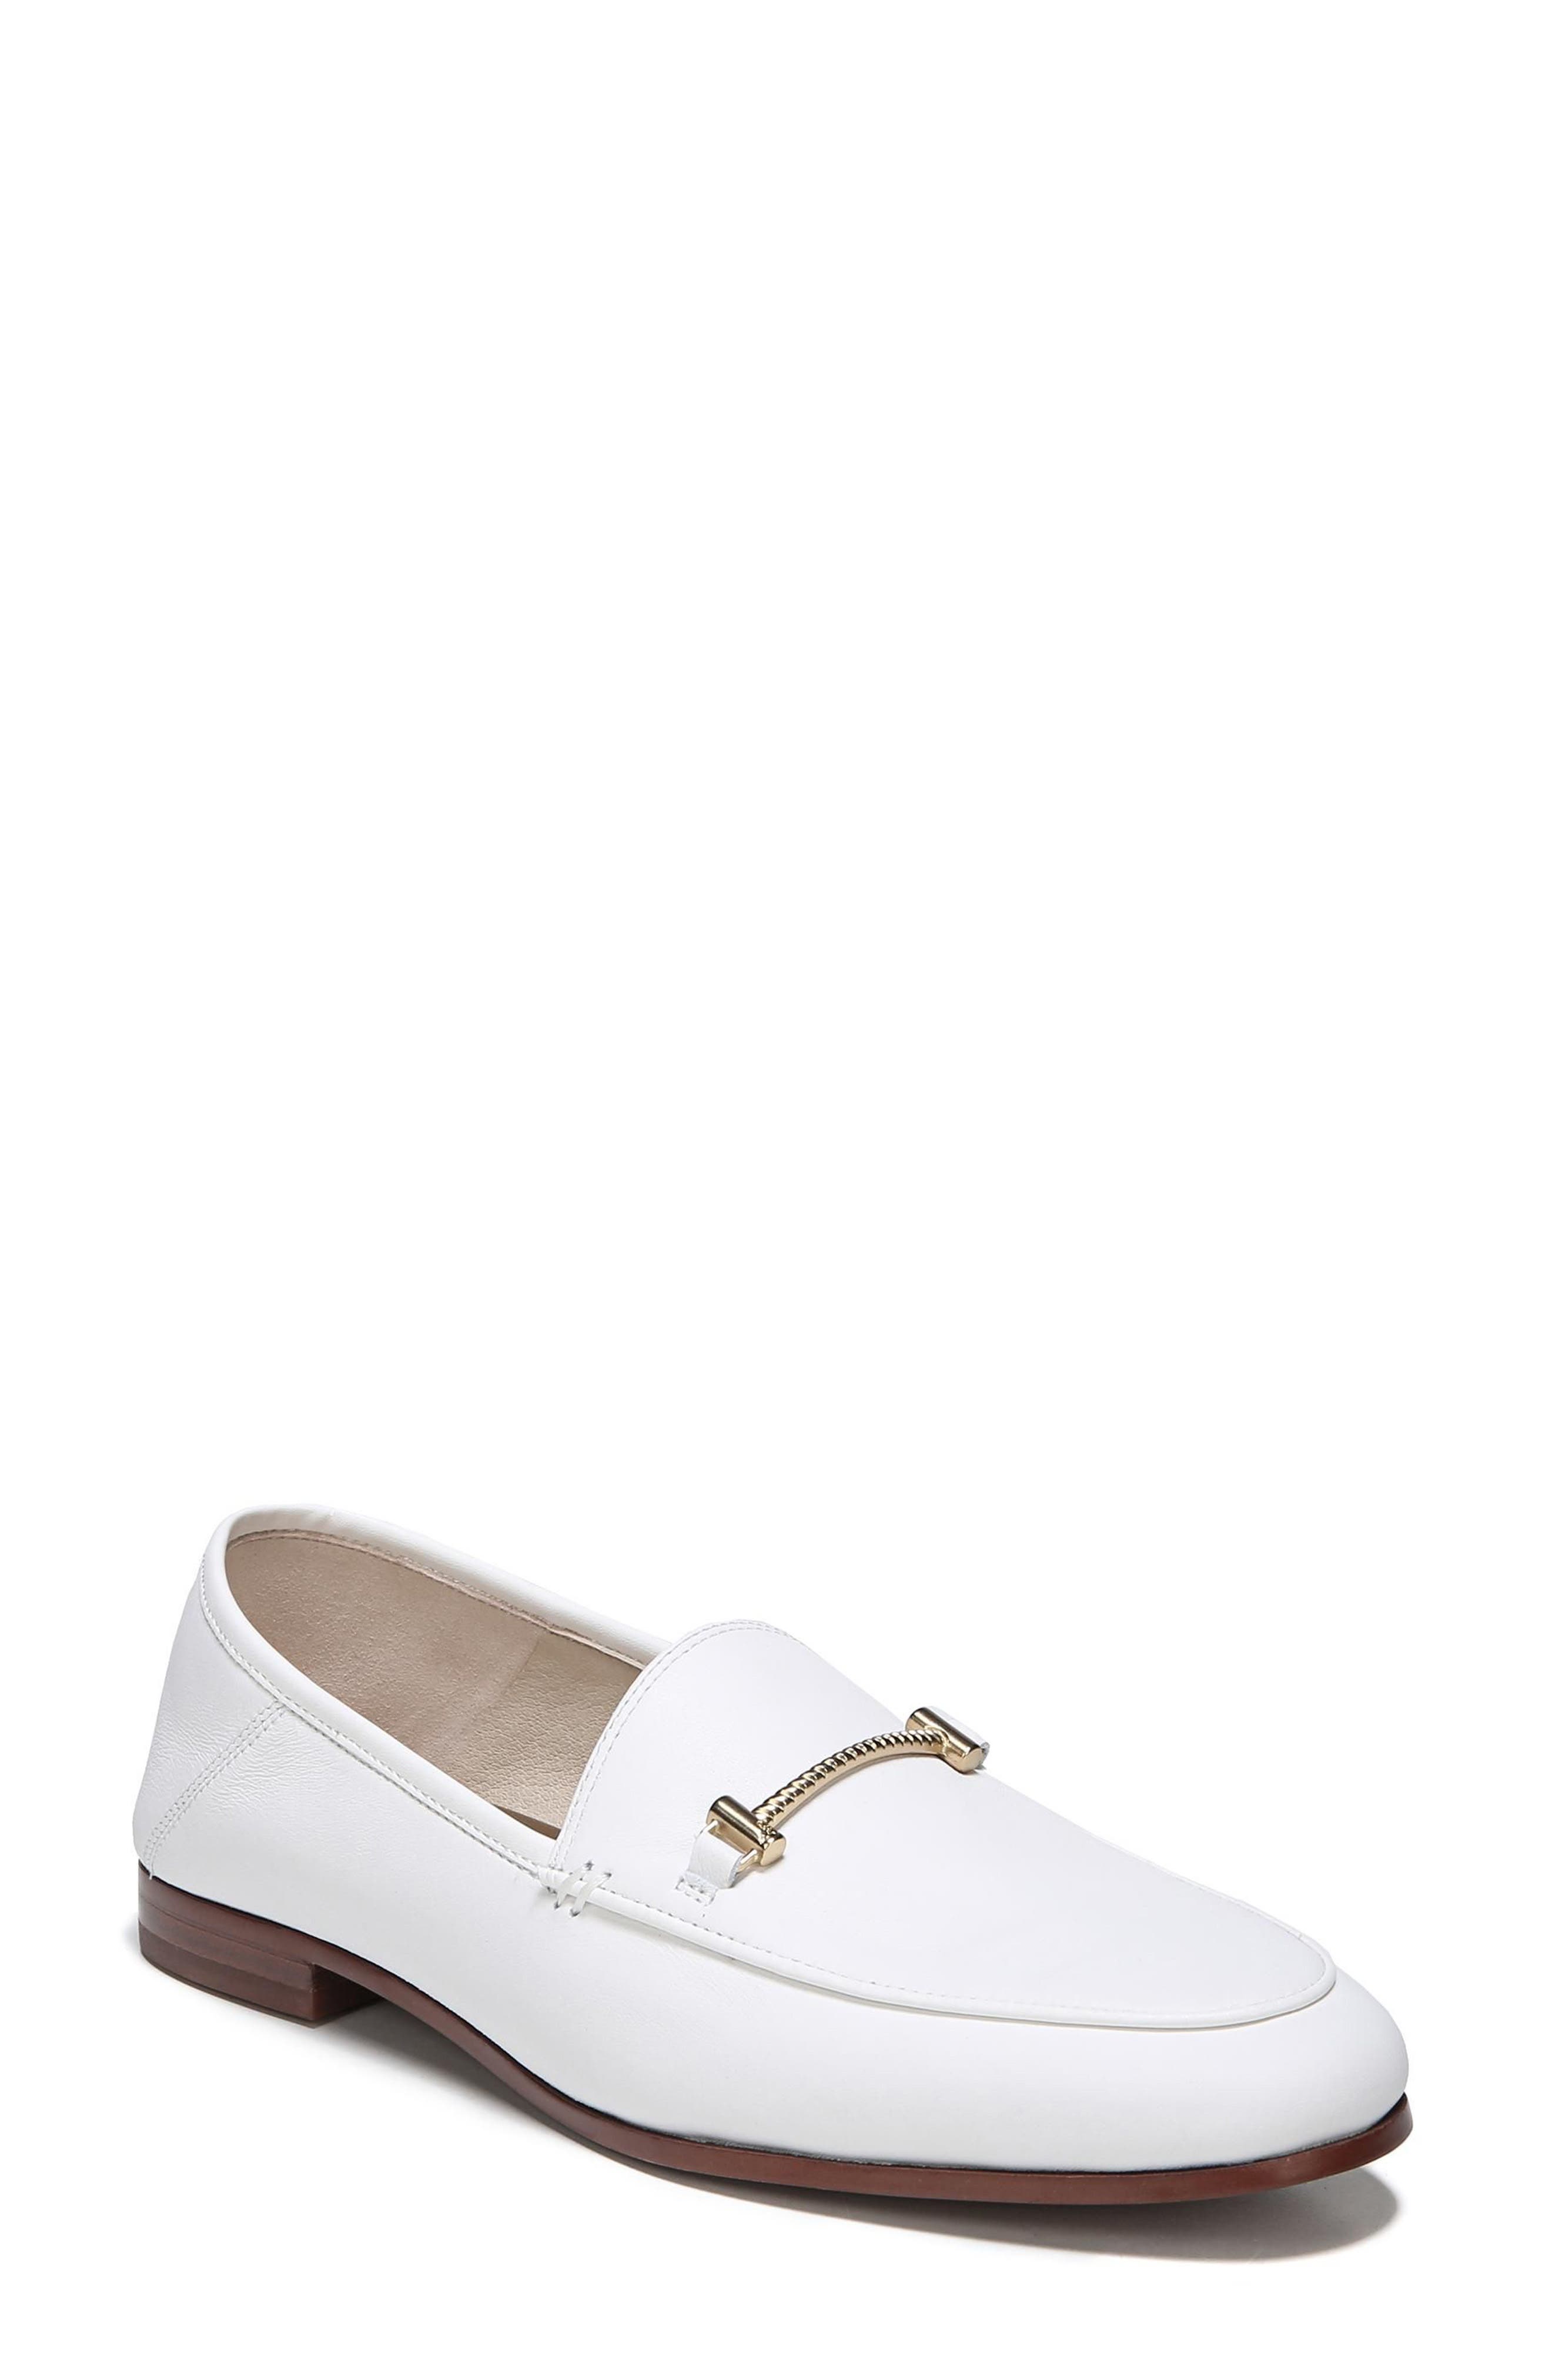 Women's White Loafers \u0026 Oxfords | Nordstrom